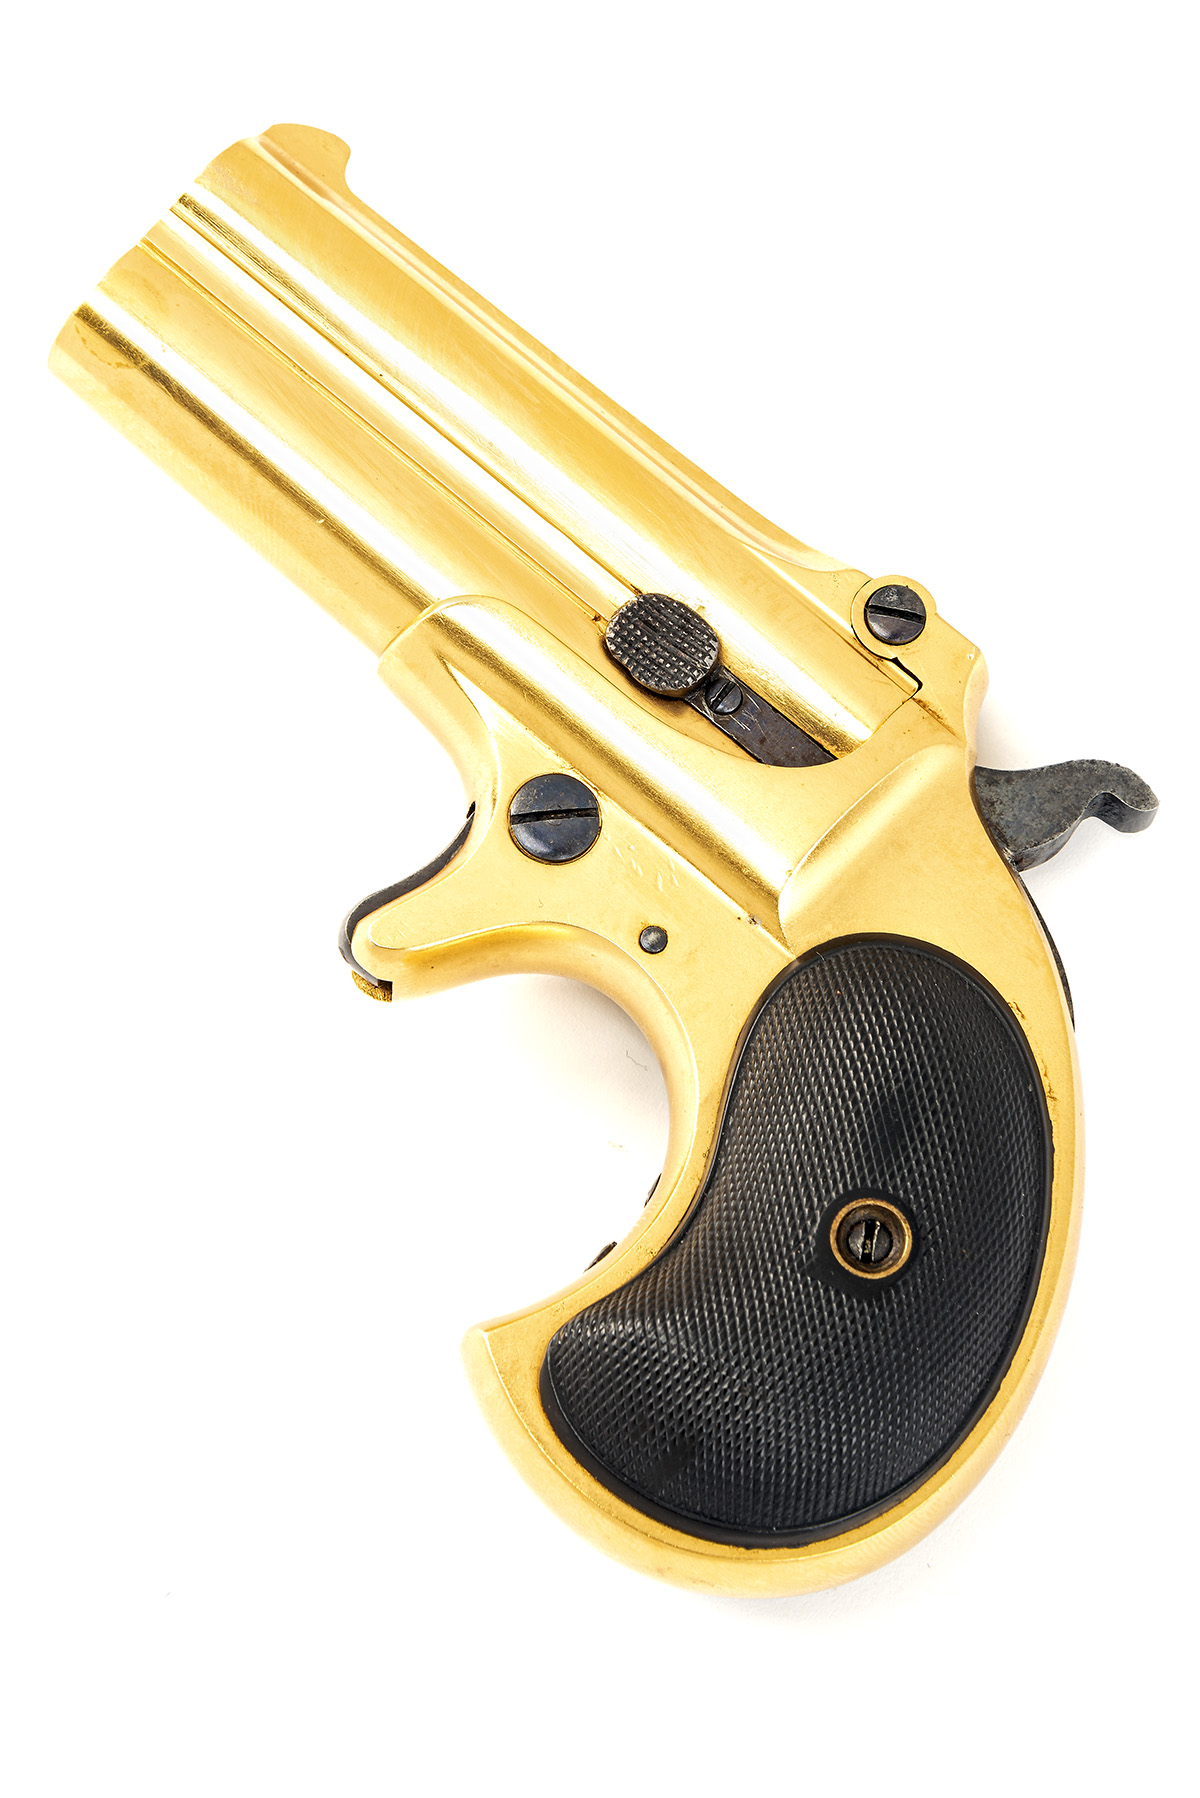 A .41 (RIMFIRE) GOLD-PLATED REMINGTON OVER AND UNDER TYPE II MODEL NO. 3 DERRINGER, CIRCA 1890, no - Image 2 of 4